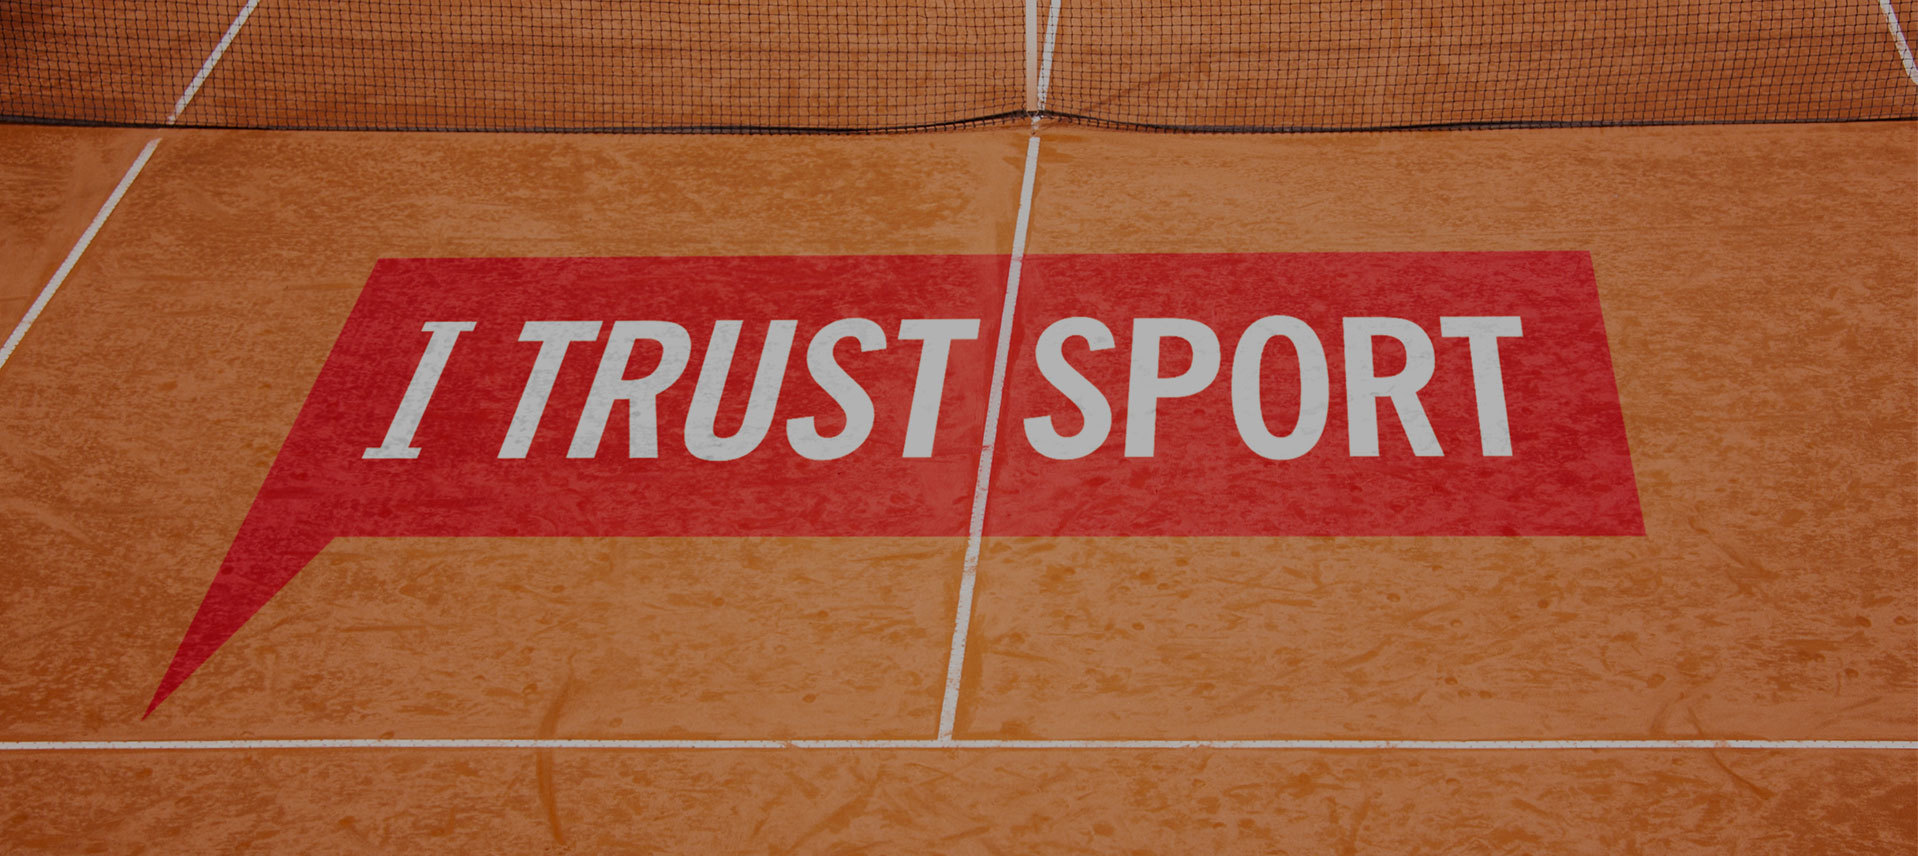 About I Trust Sport